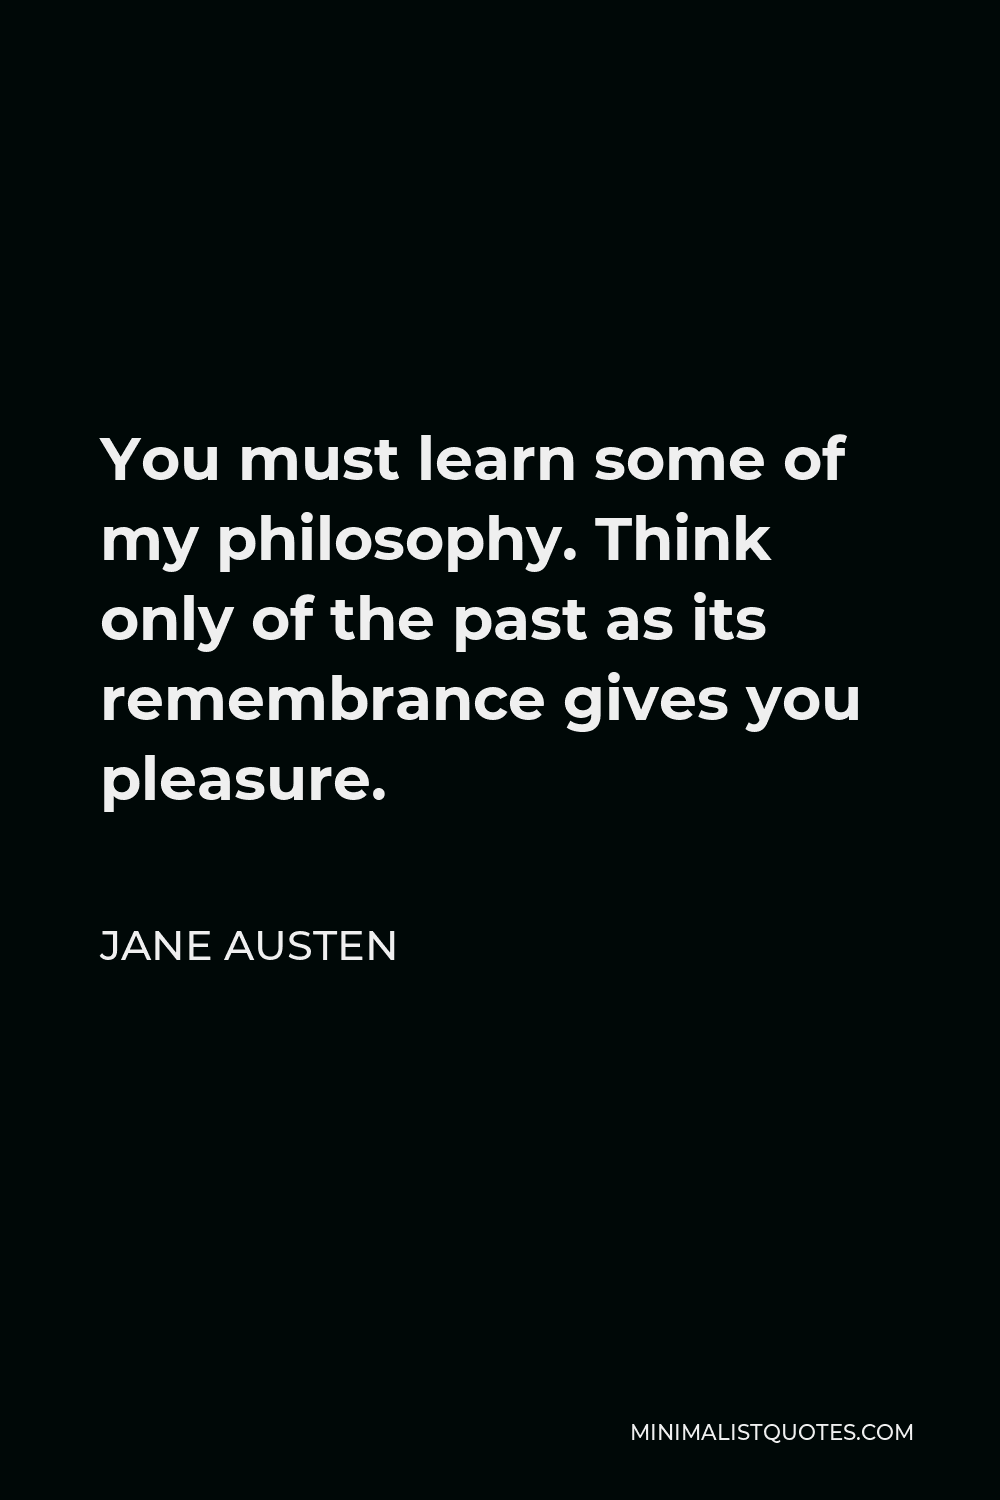 krog kaste Kortfattet Jane Austen Quote: You must learn some of my philosophy. Think only of the  past as its remembrance gives you pleasure.